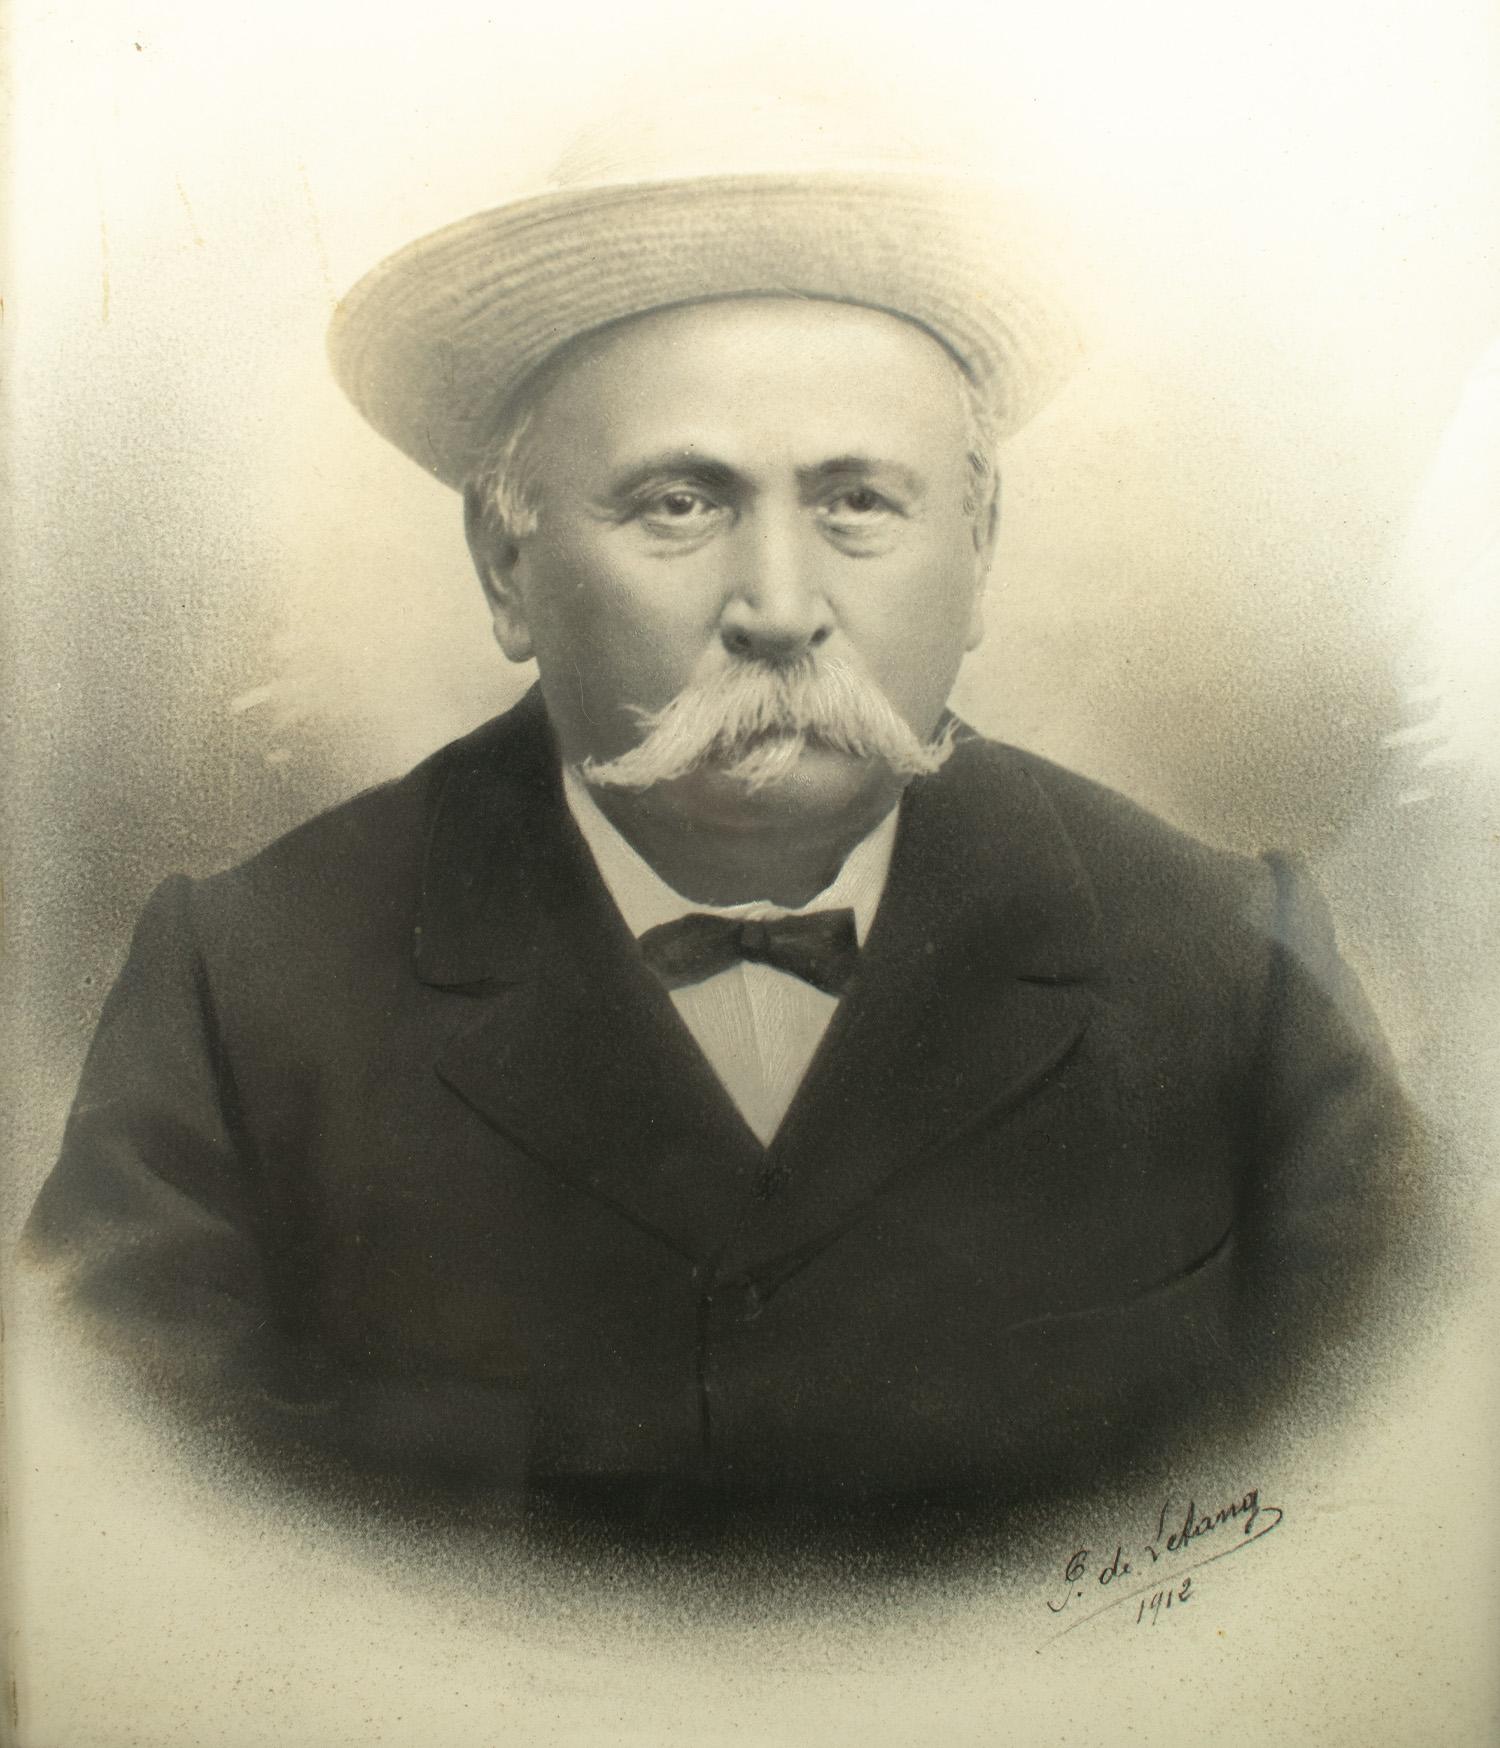 Original large oak framed portrait photograph of an older French gentleman, French, signed & dated 1912.

Original oak frame. Size framed : 63cm x 52cm.

Showing some signs of age and wear with a few inactive worm holes, but altogether a lovely and